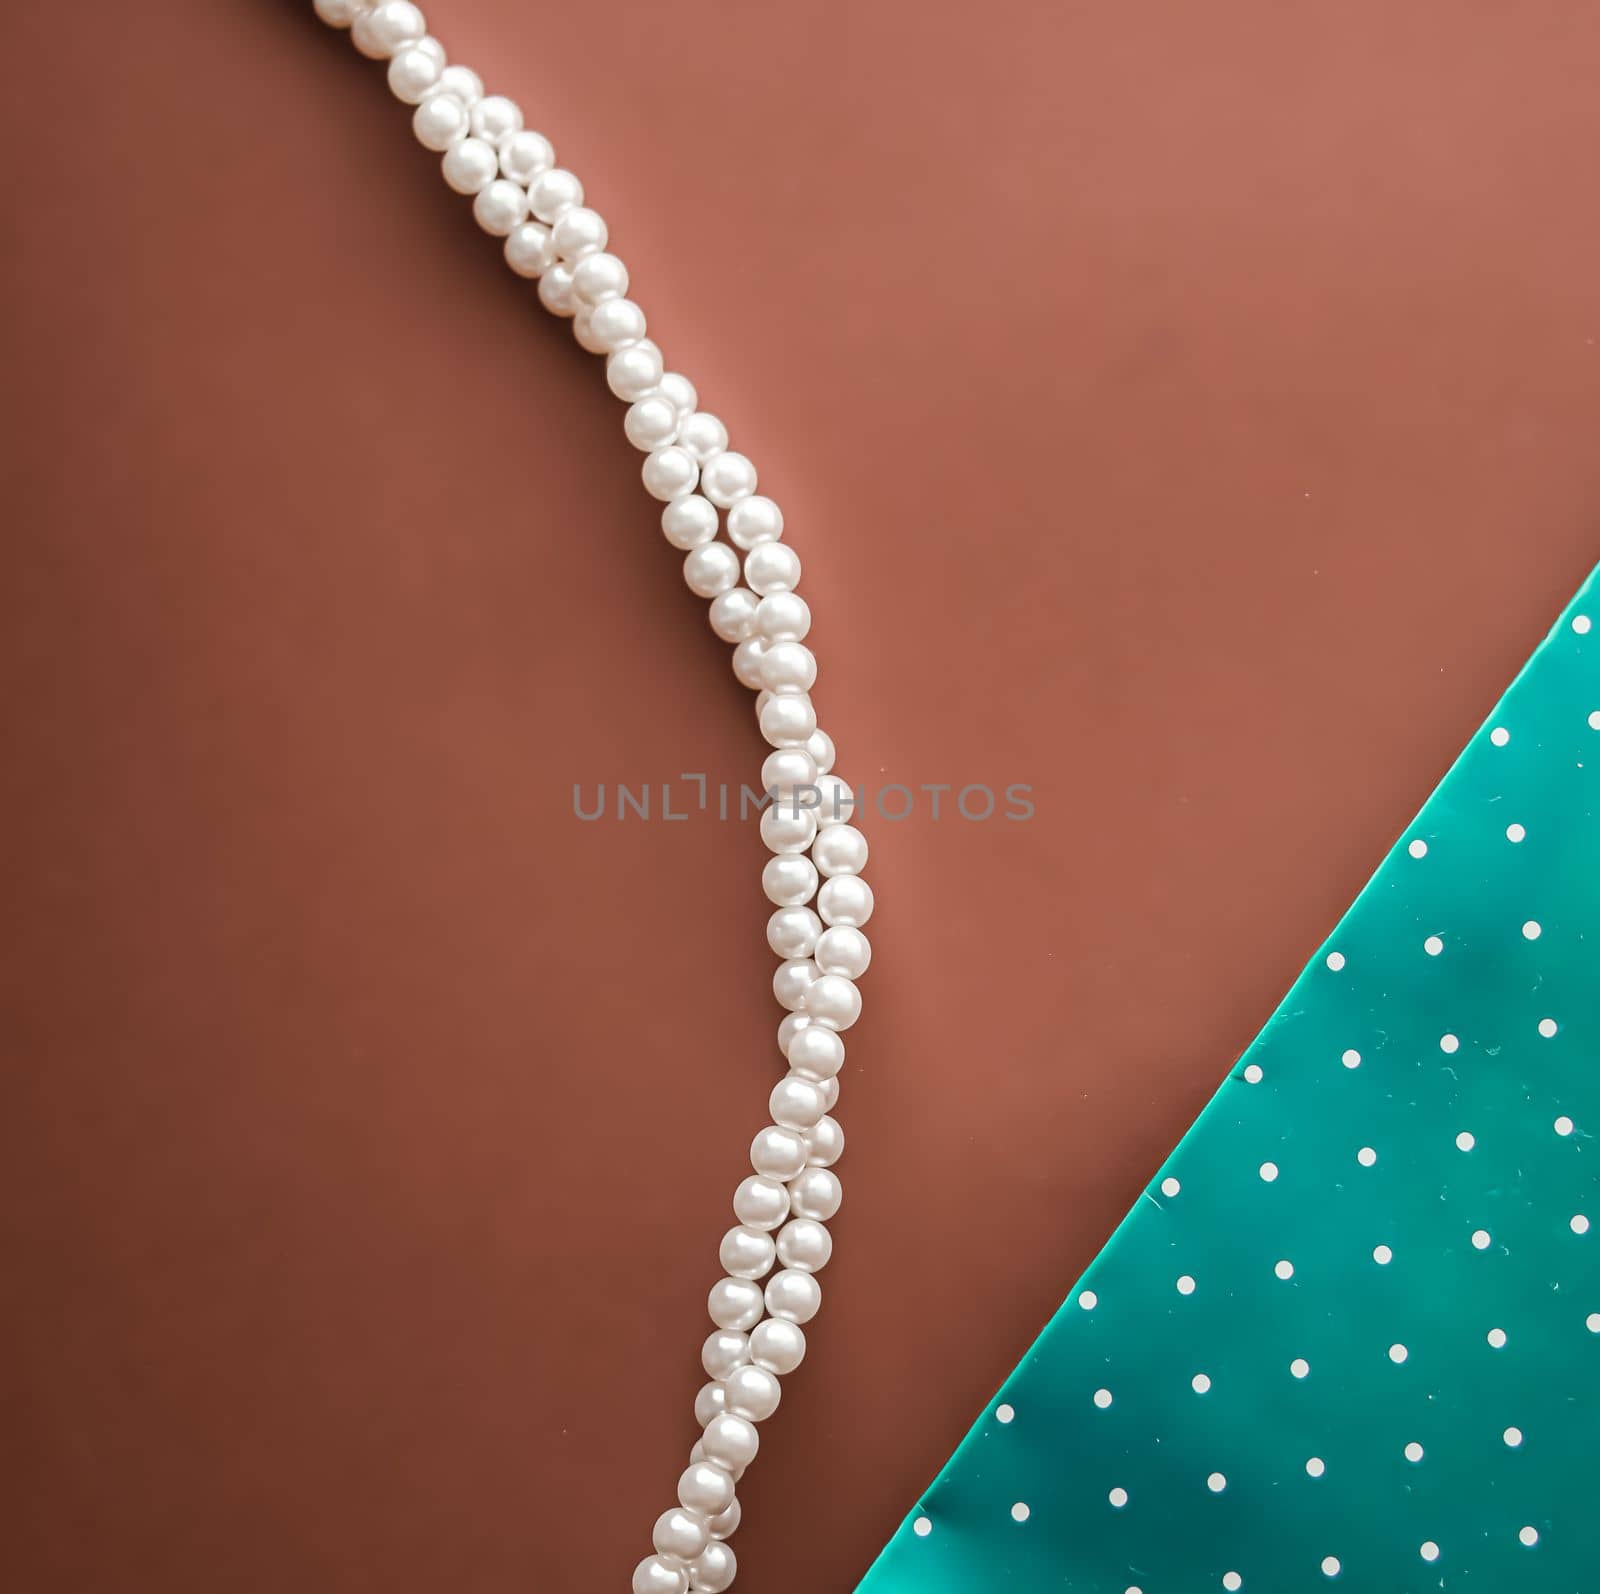 Pearl jewellery necklace and abstract green polka dot background on brown backdrop.